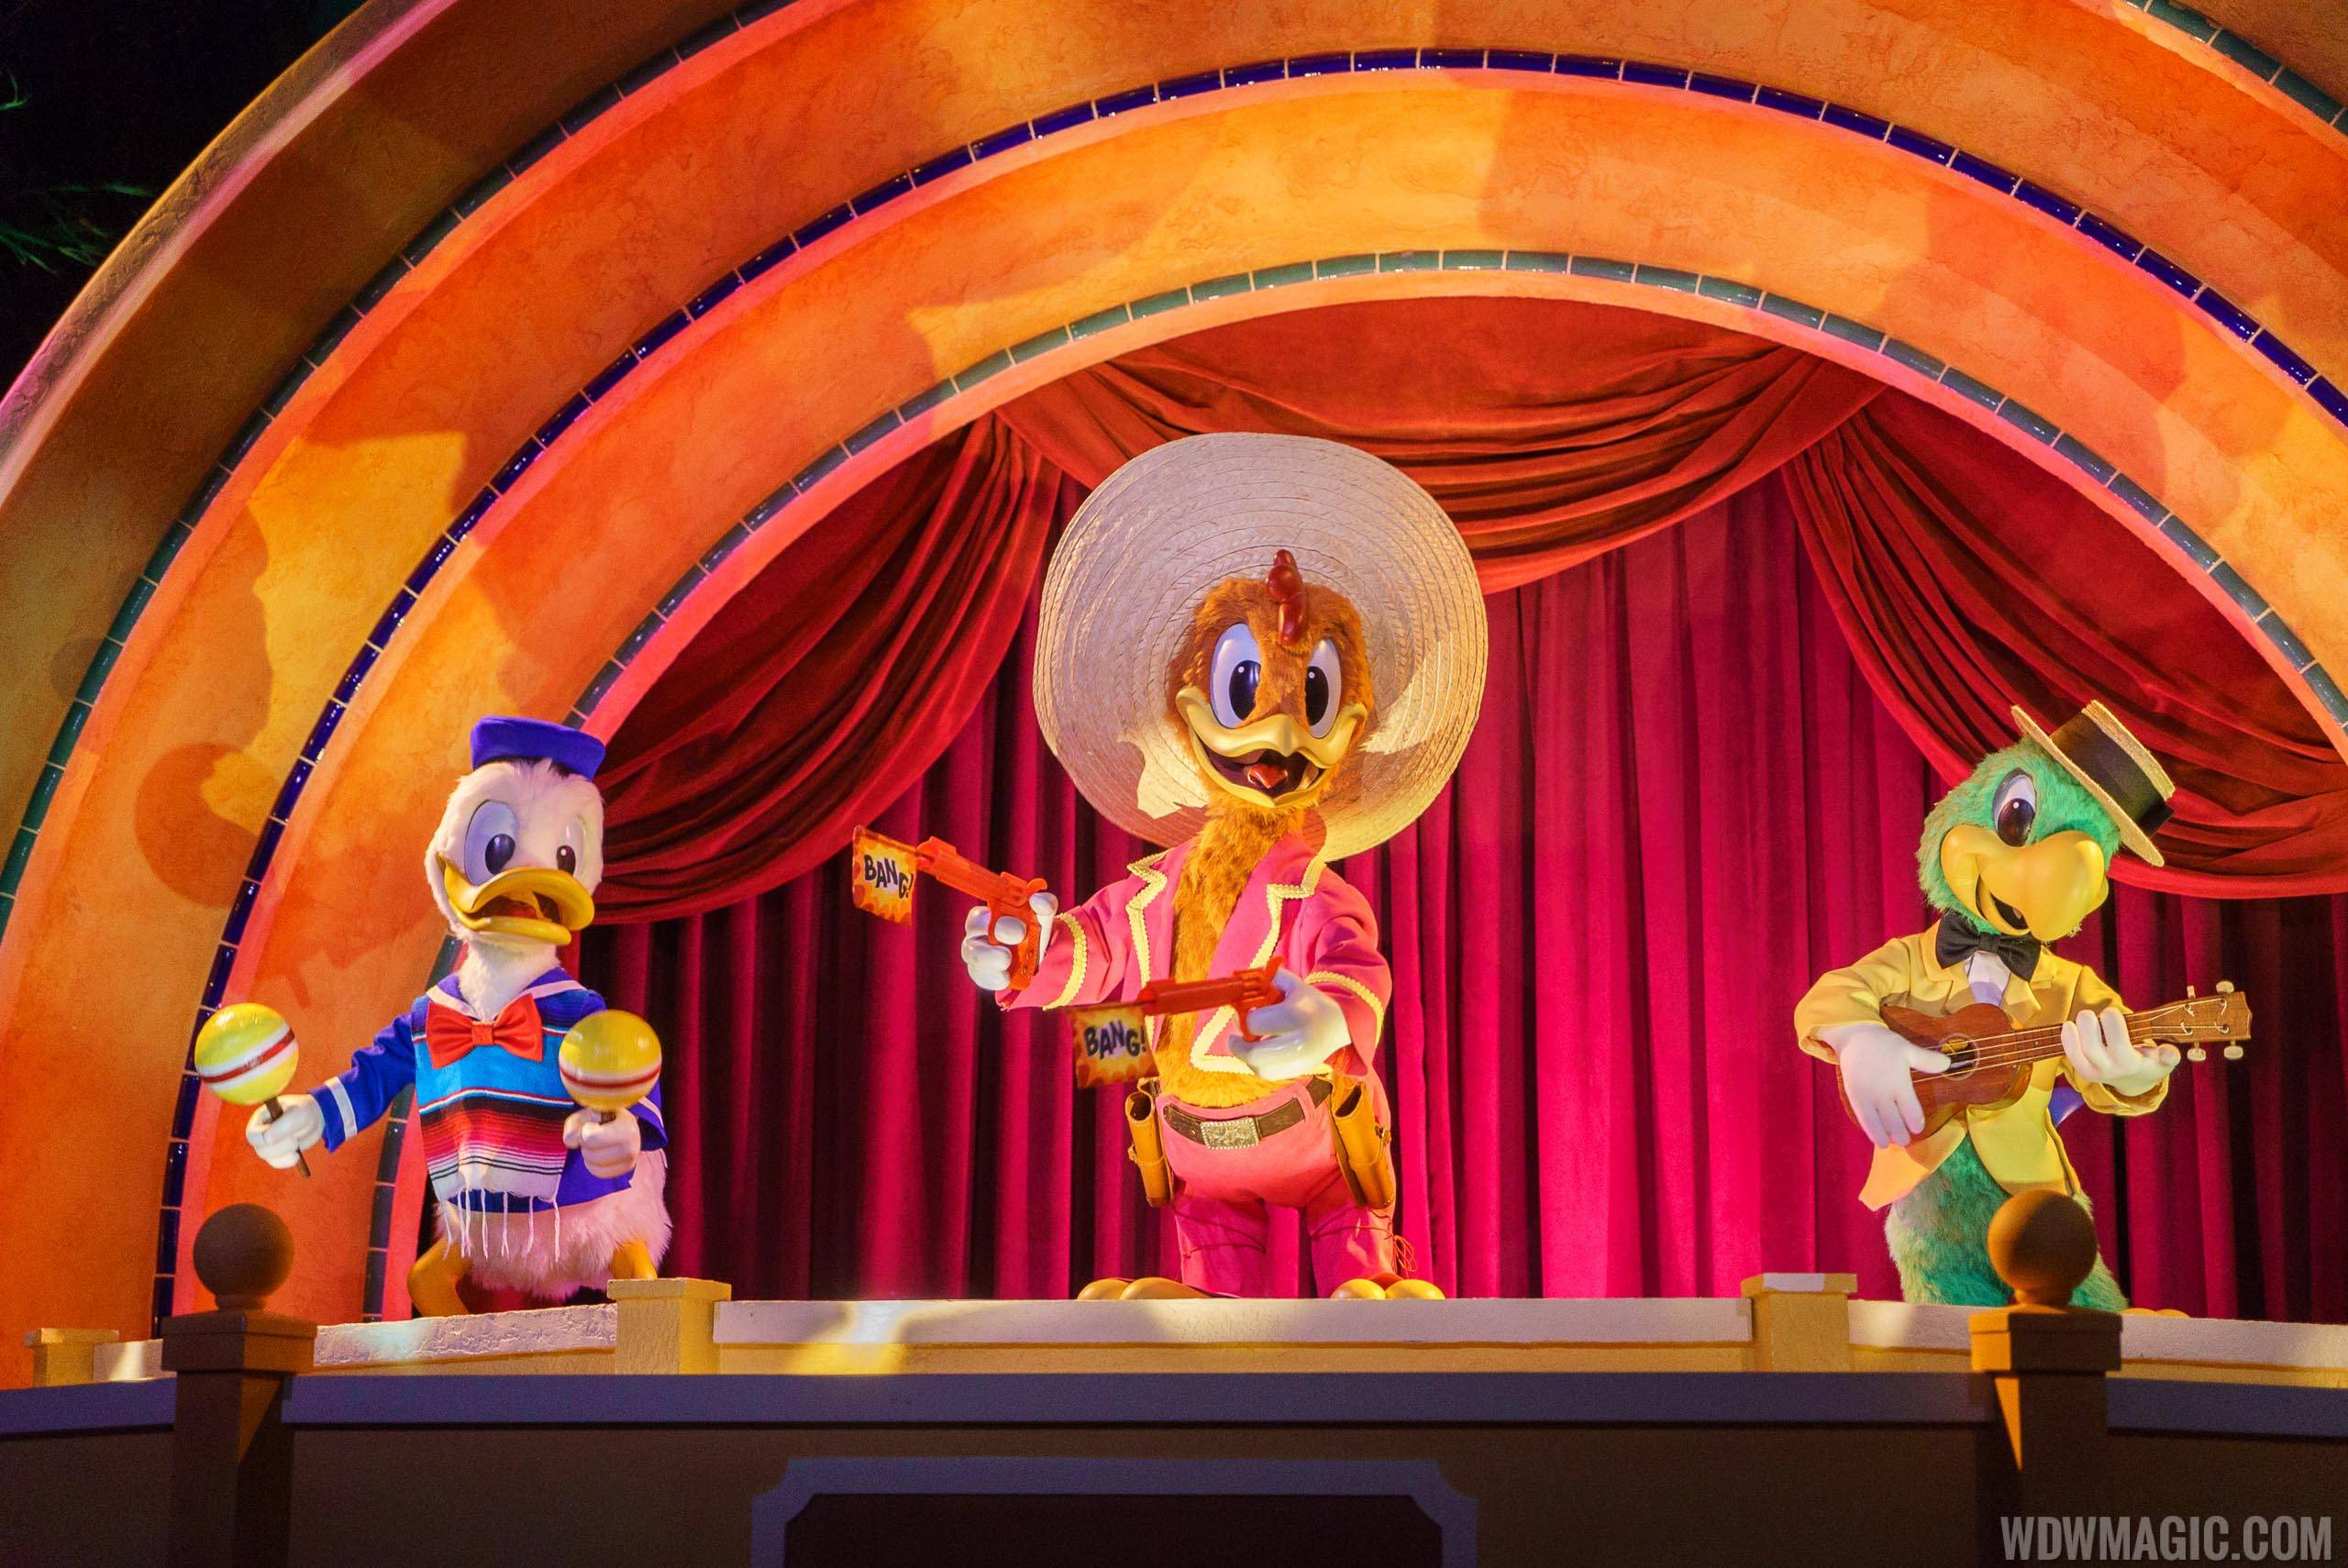 Gran Fiesta Tour Starring the Three Caballeros to move to a 9am opening